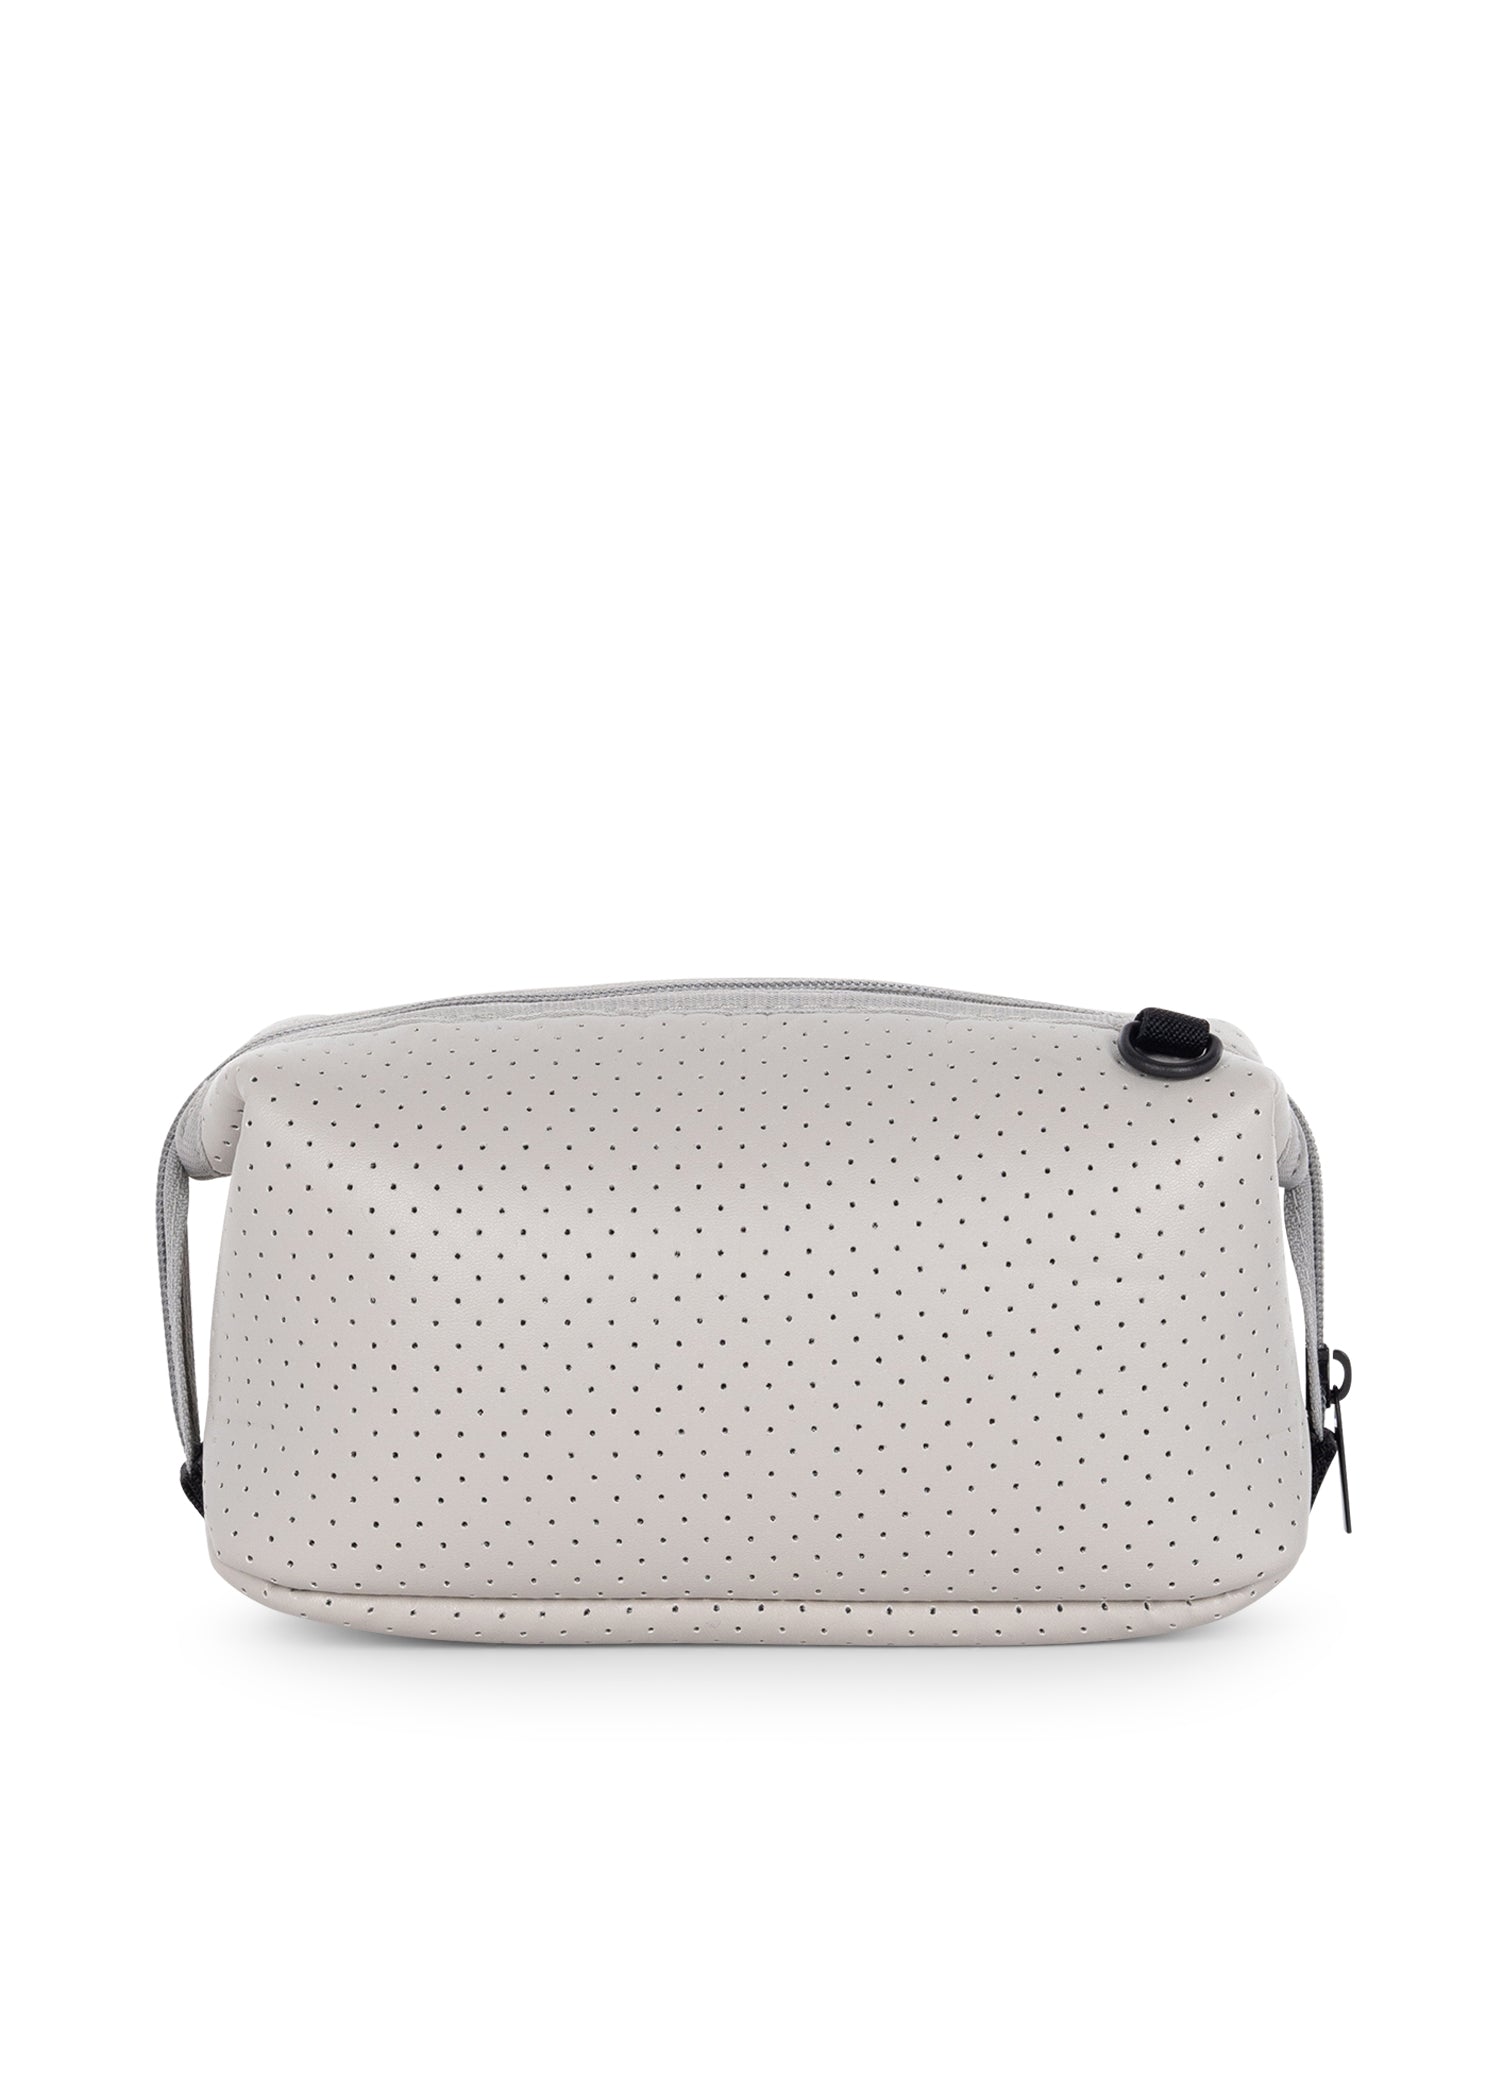 erin shell cosmetic case